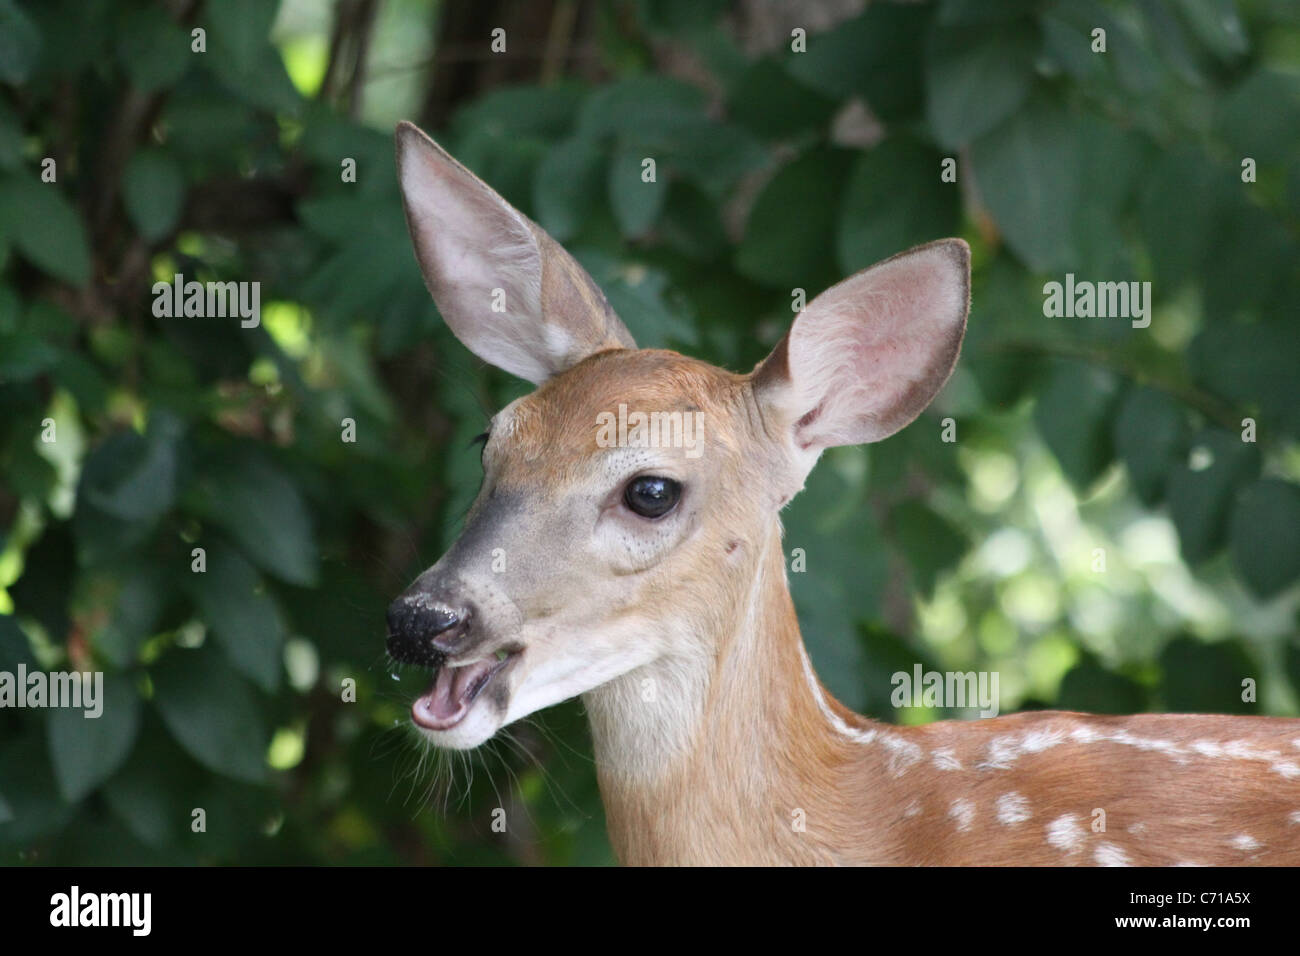 Close up of a white tail deer spotted fawn chewing leaves with a background of green leaves. Stock Photo